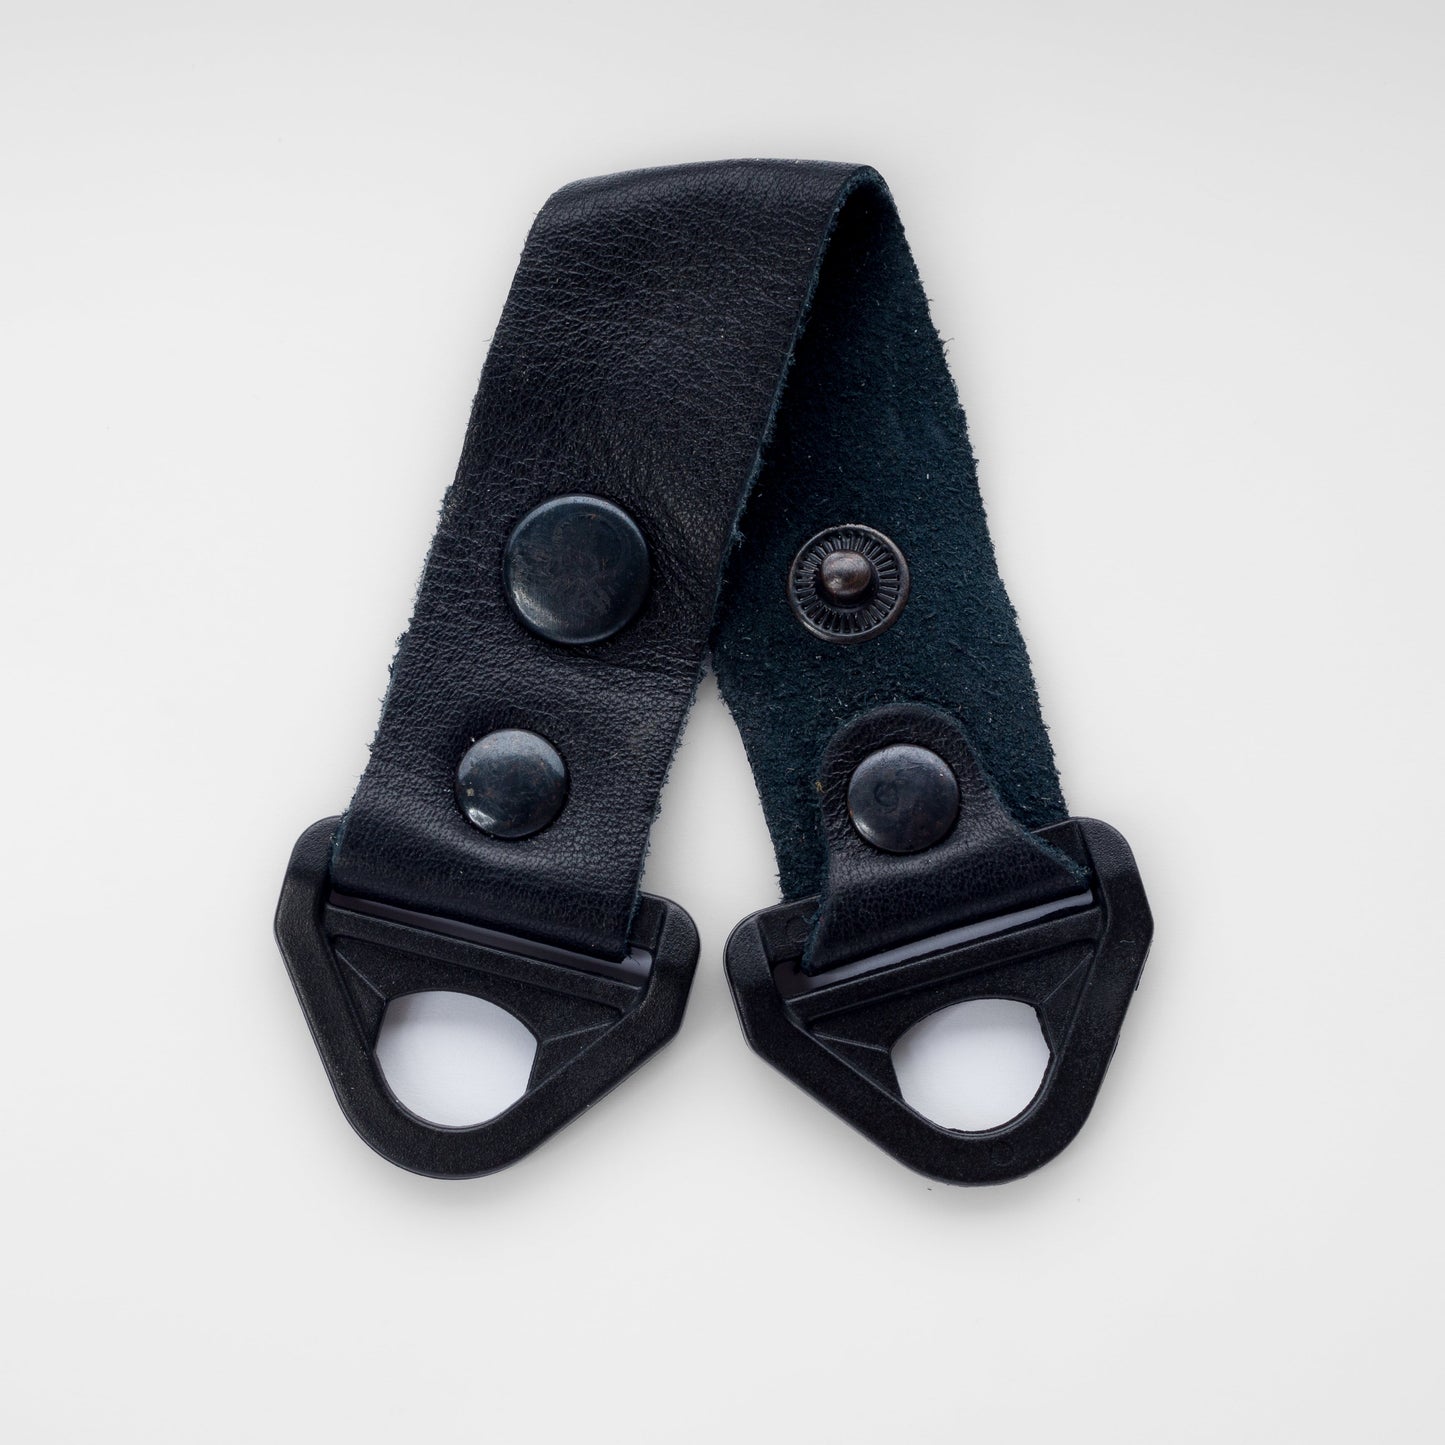 Strap & Pair of Strap Buckles